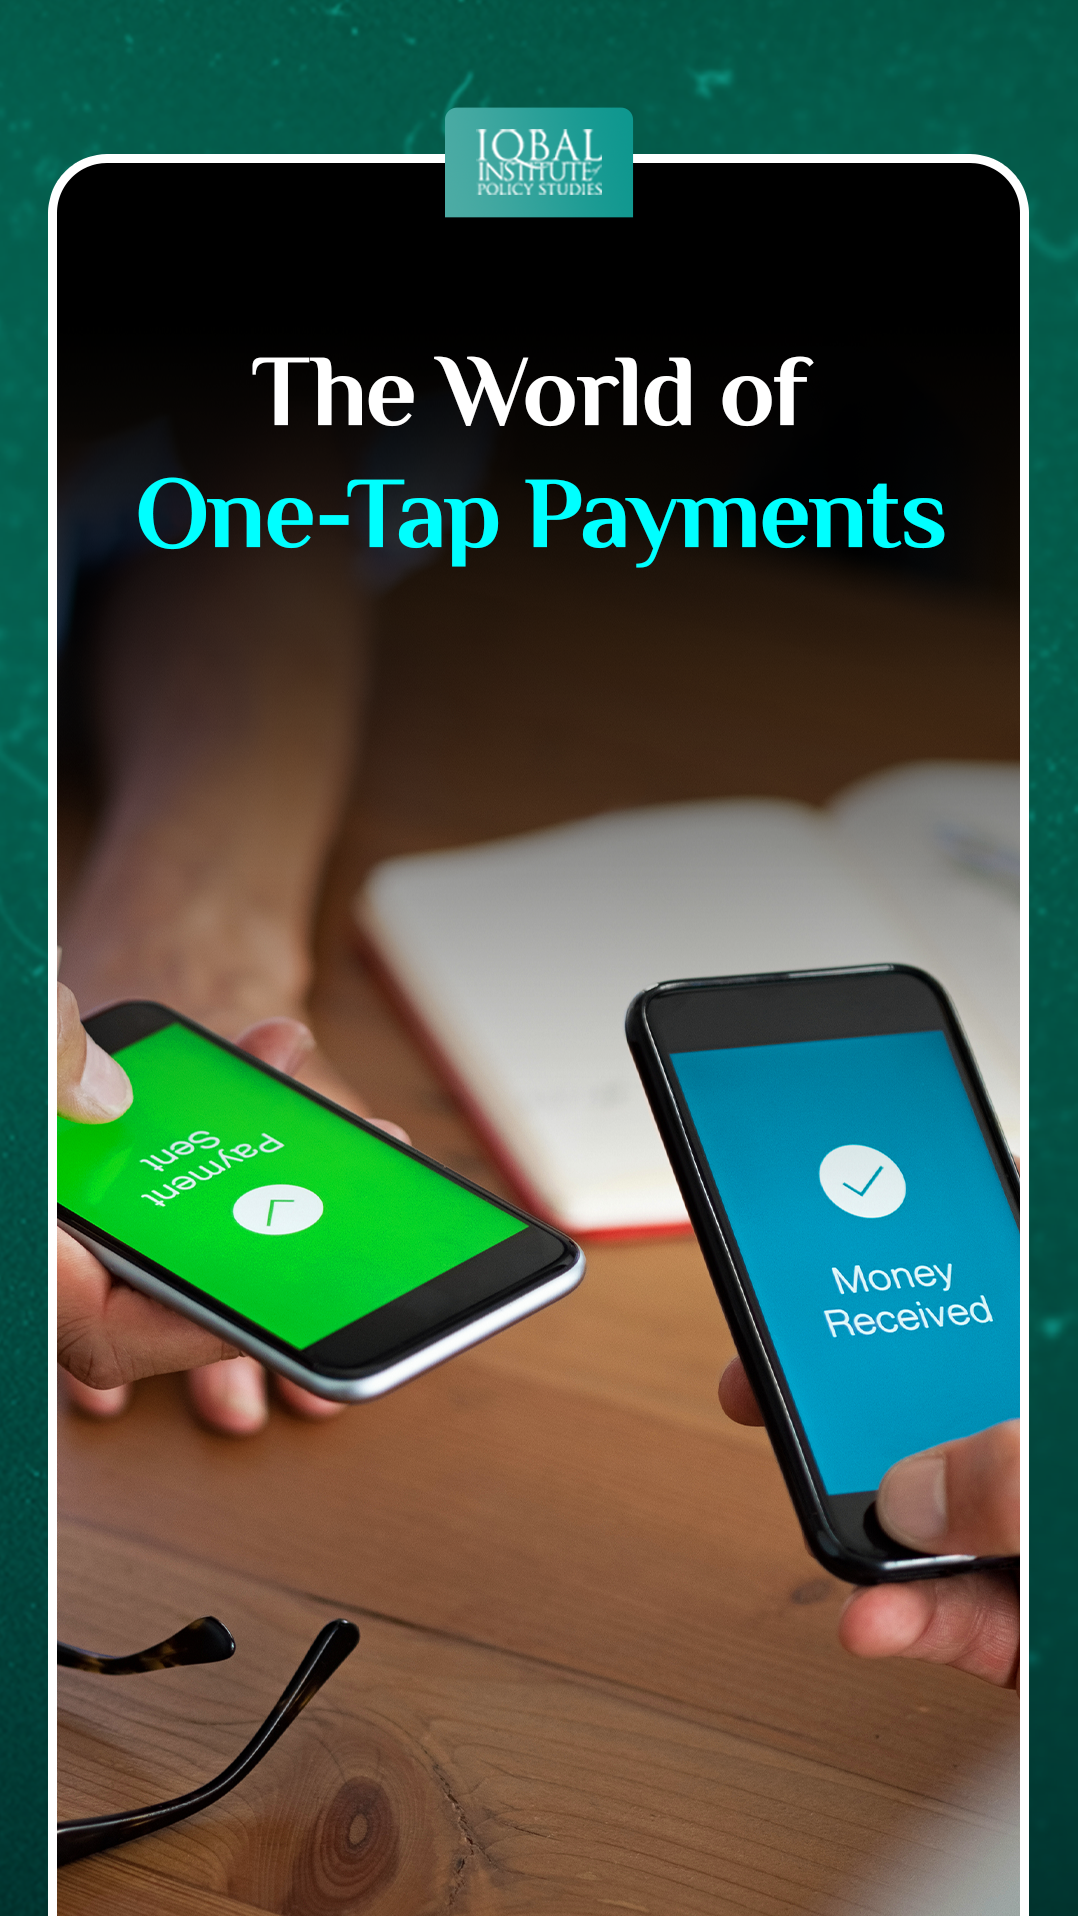 The World of One-Tap Payments